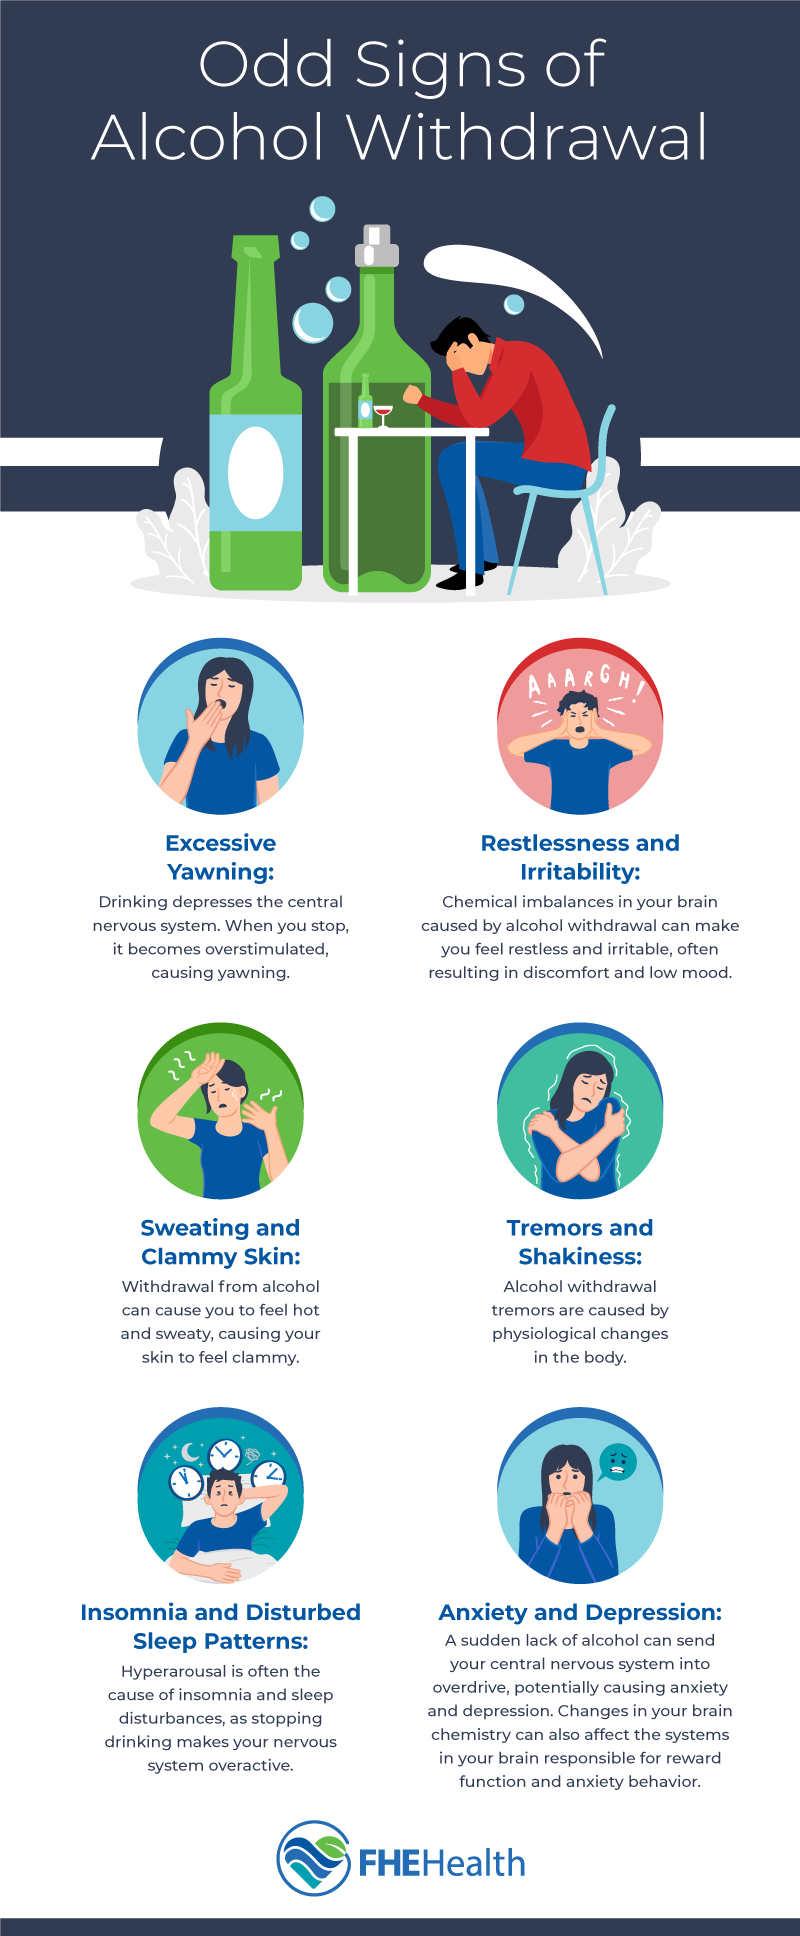 FHE Odd Signs of Alcohol Withdrawal Infographic - Yawning, Sweating, Insomnia, Anxiety